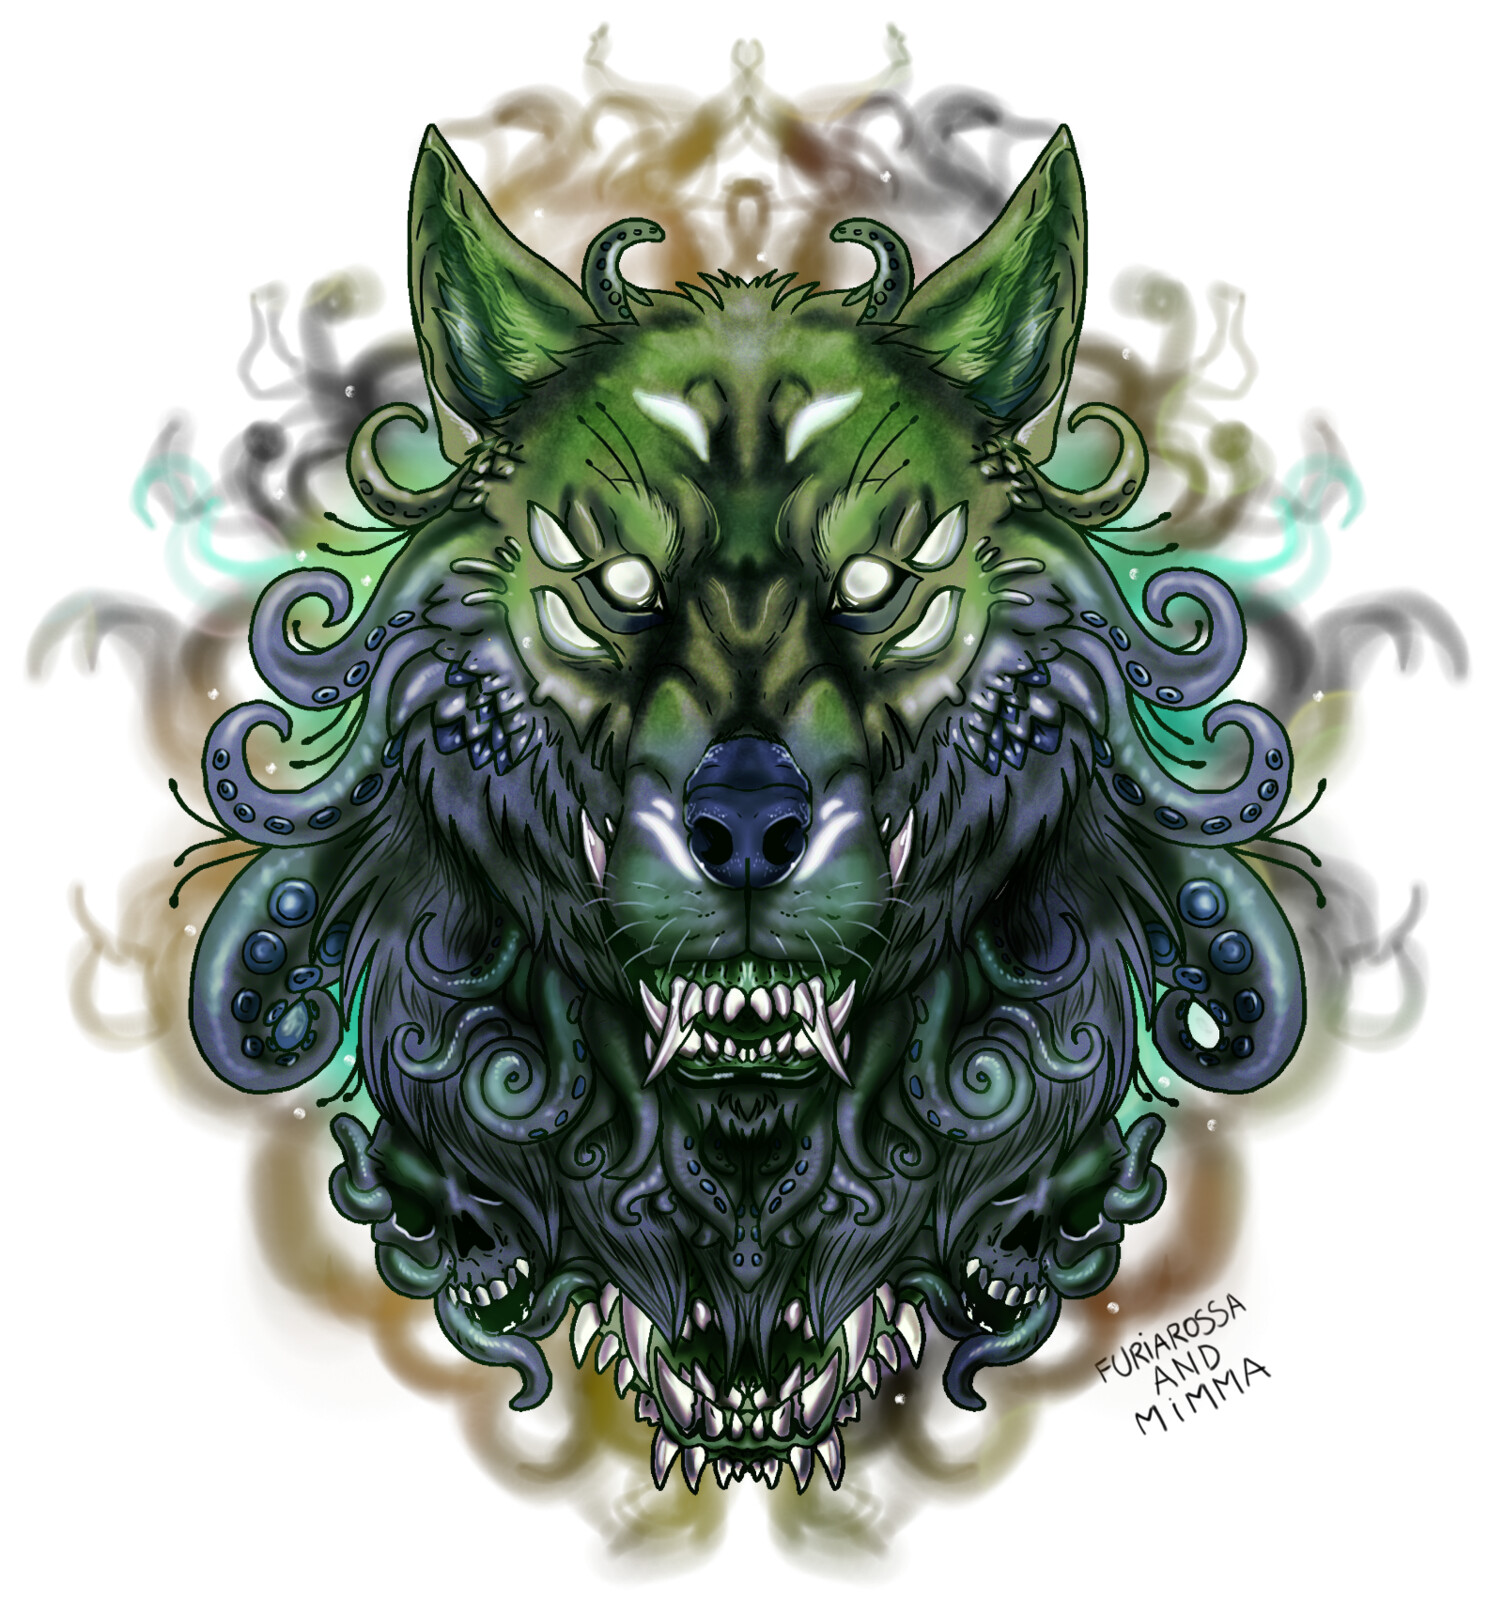 Another ArtFight attack! Mad_Machine described their character Phtaghu'ai like this "They don't have a defined form, more just a dark werewolf who's hit the cthulhu button a few times so do whatever [...] Teeth, eyes, skulls, whatever is great